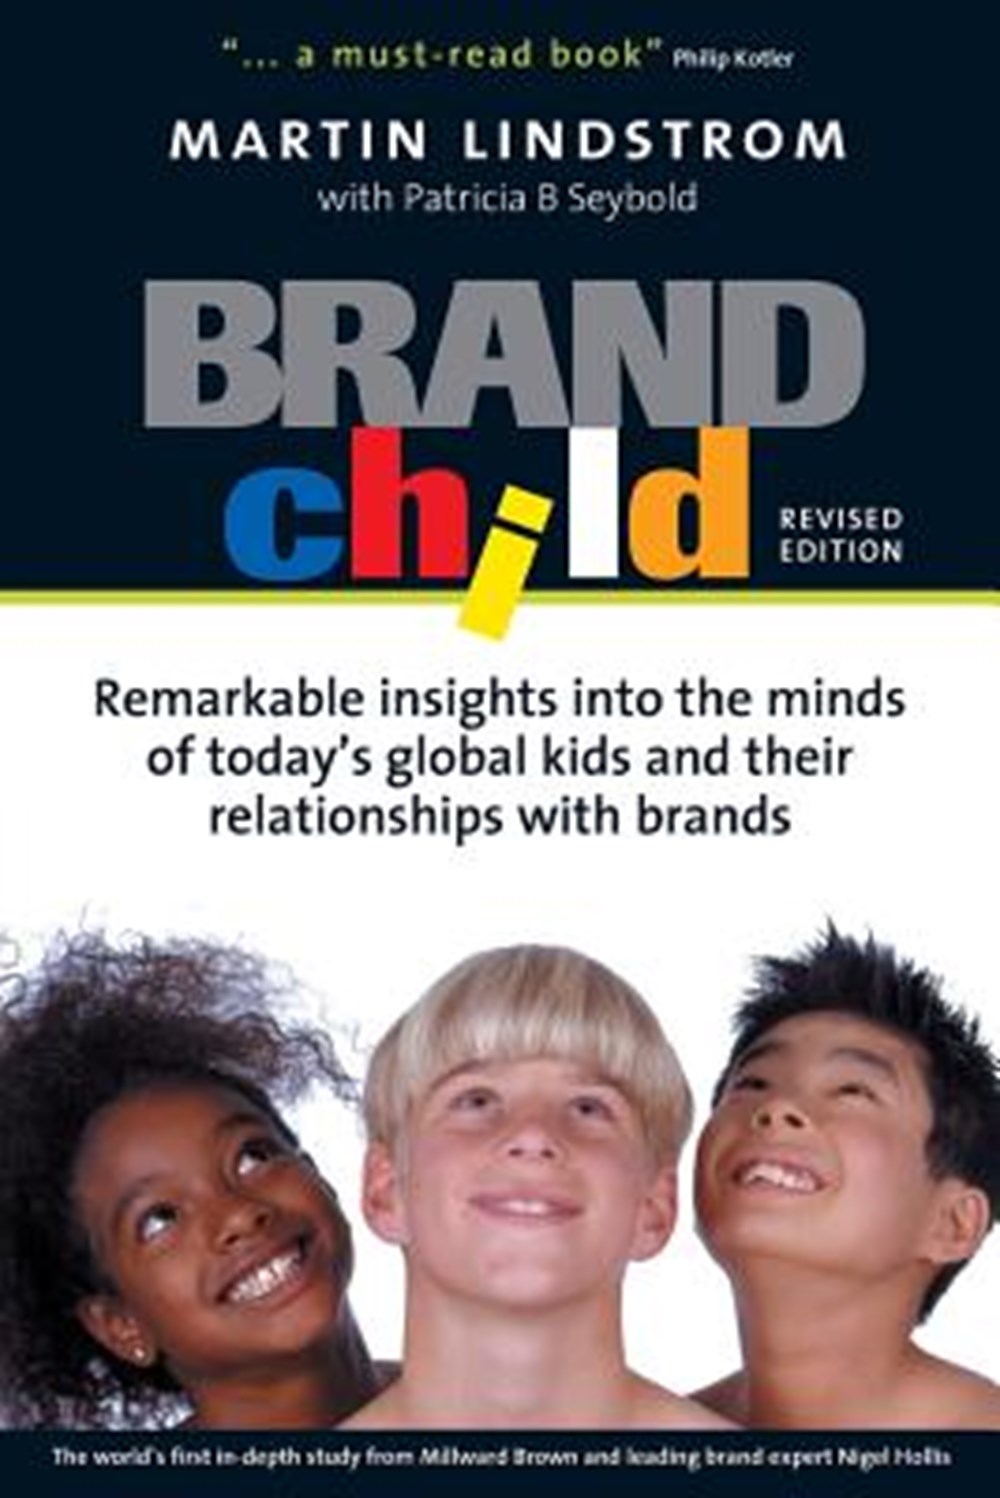 Brandchild Remarkable Insights Into the Minds of Today's Global Kids & Their Relationships with Bran